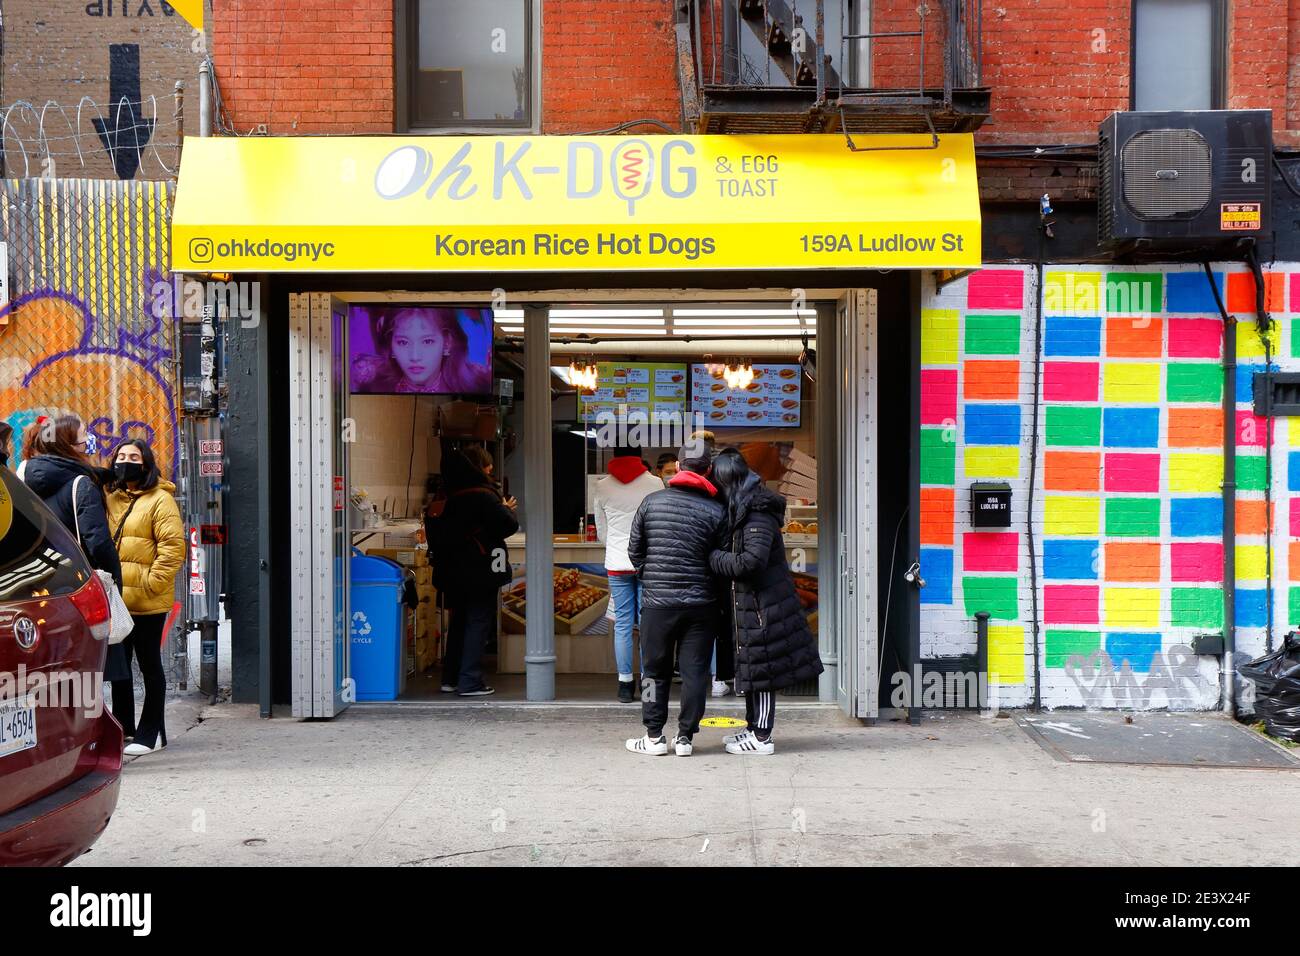 Oh K-Dog, 159 Ludlow St, New York, NYC storefront photo of a Korean rice hotdog and egg toast shop in Manhattan's Lower East Side neighborhood. Stock Photo